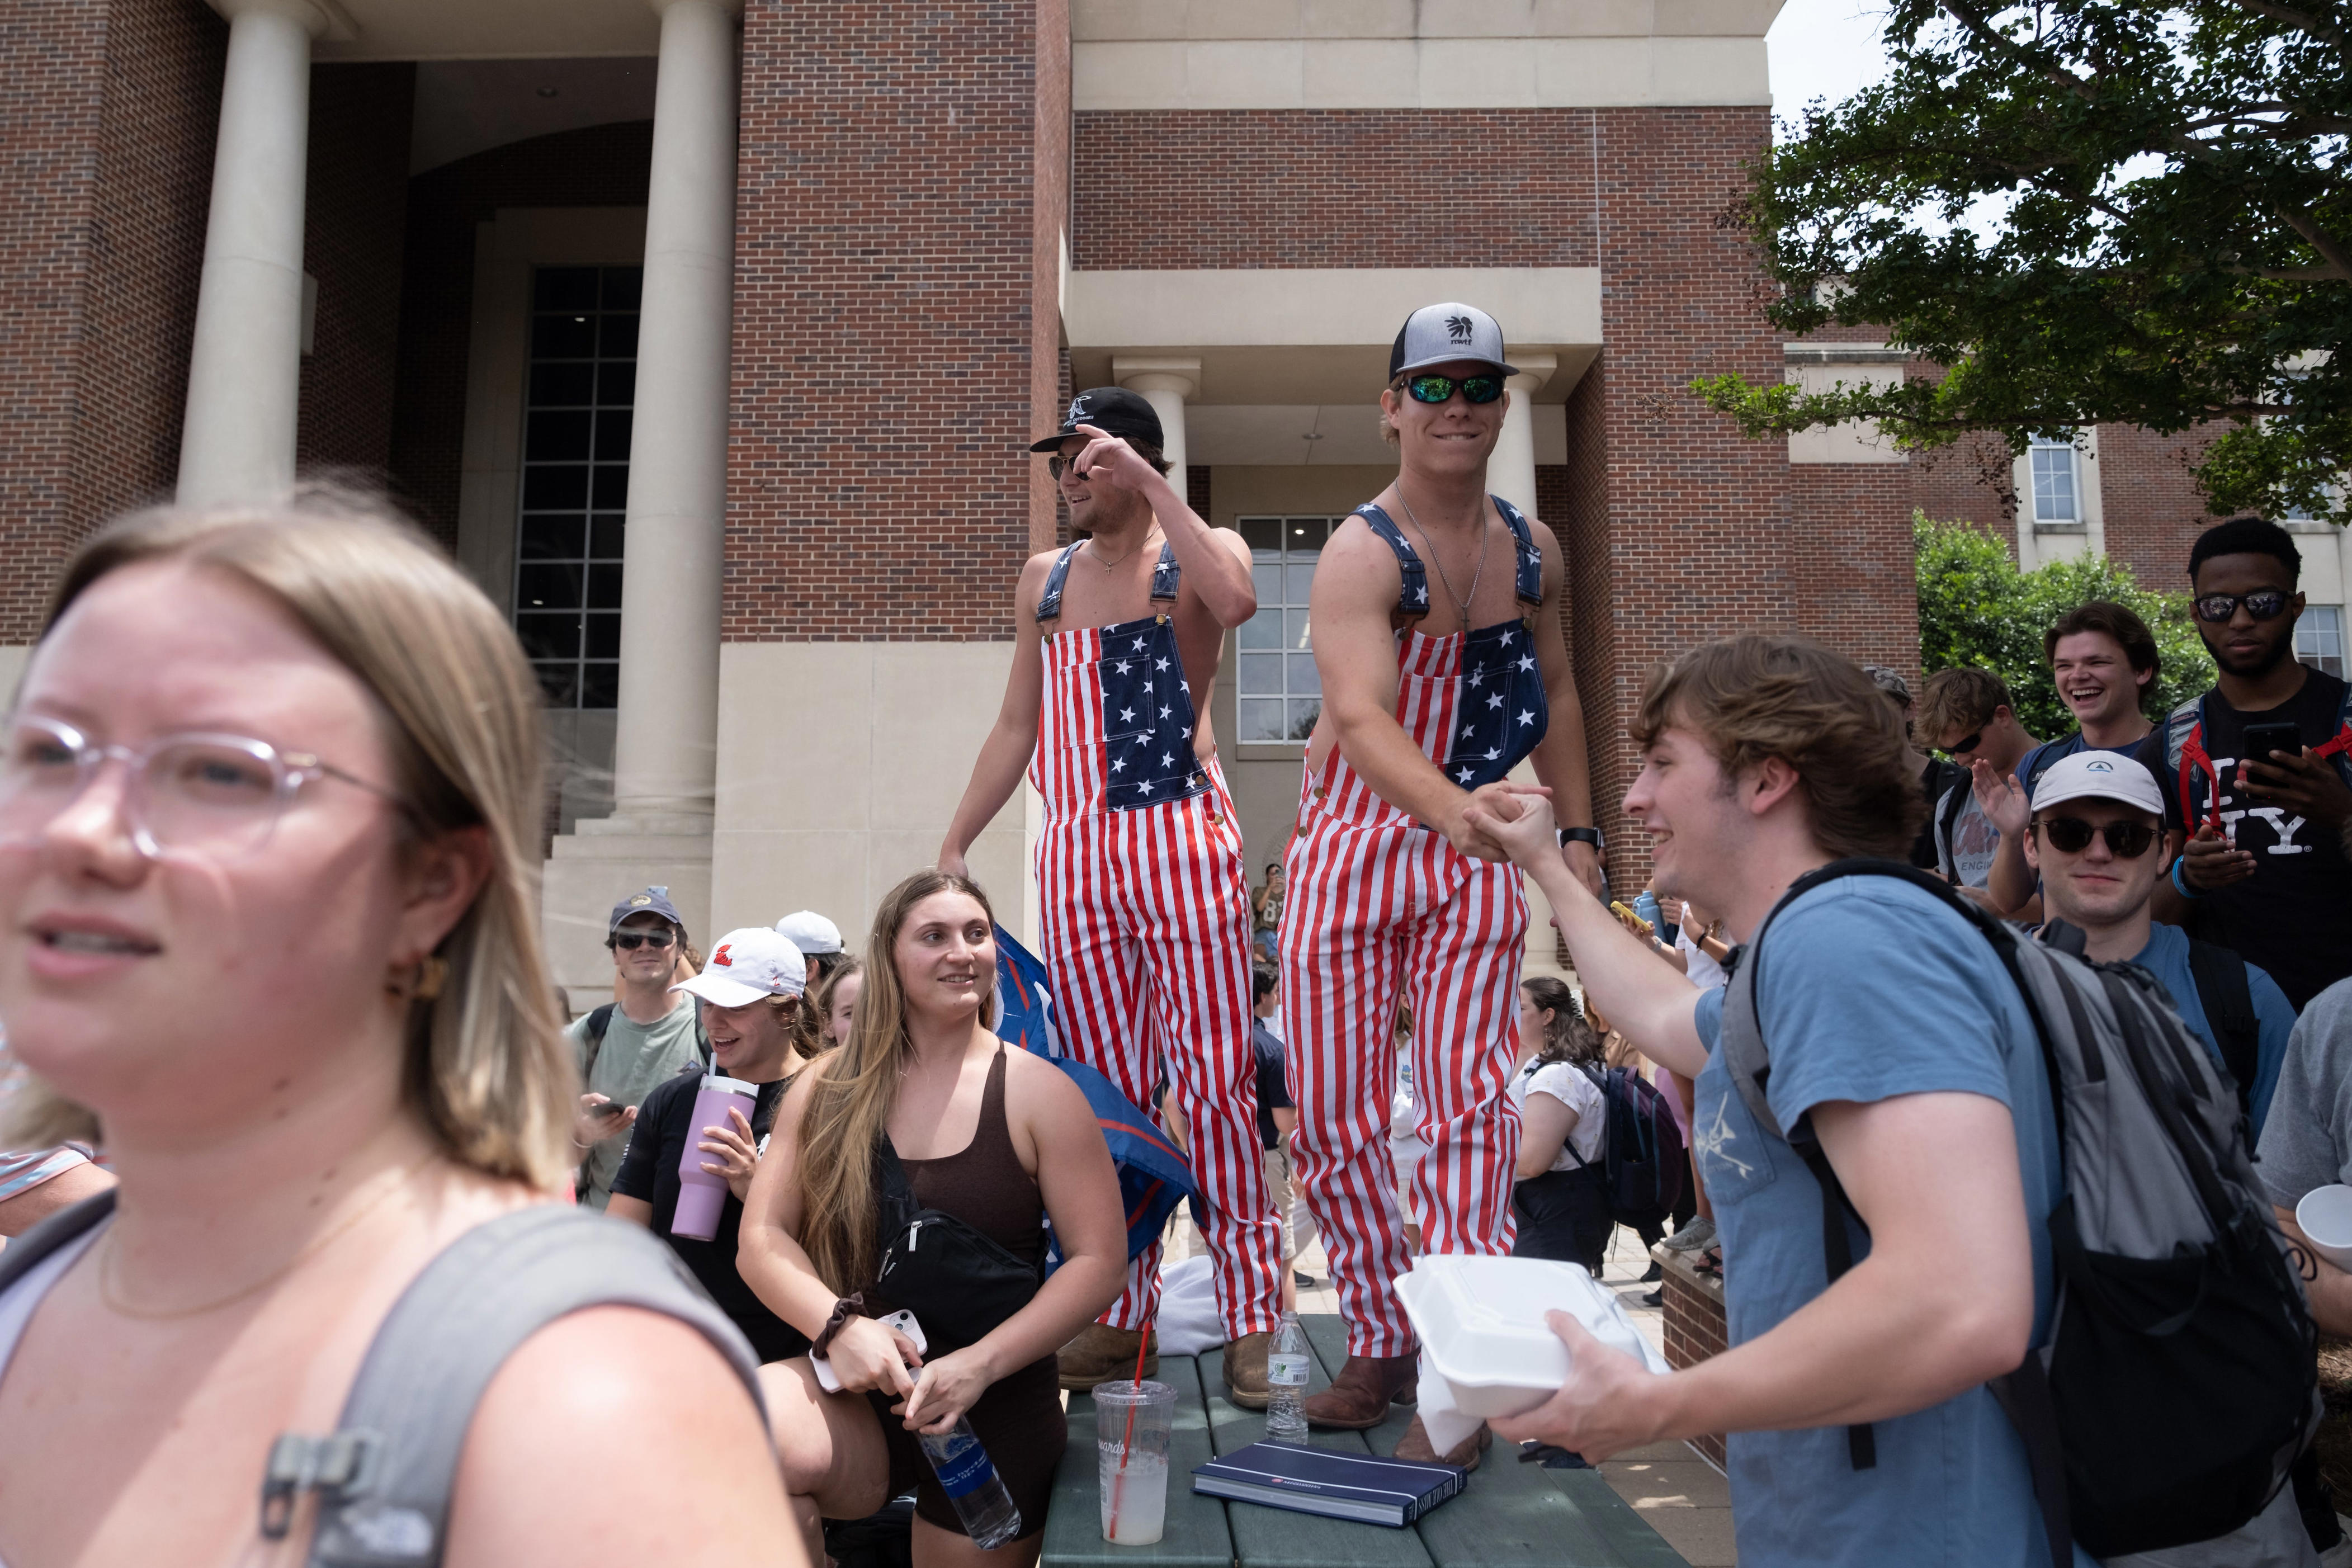 photo of university of mississippi students with 'trump won' flag is altered | fact check